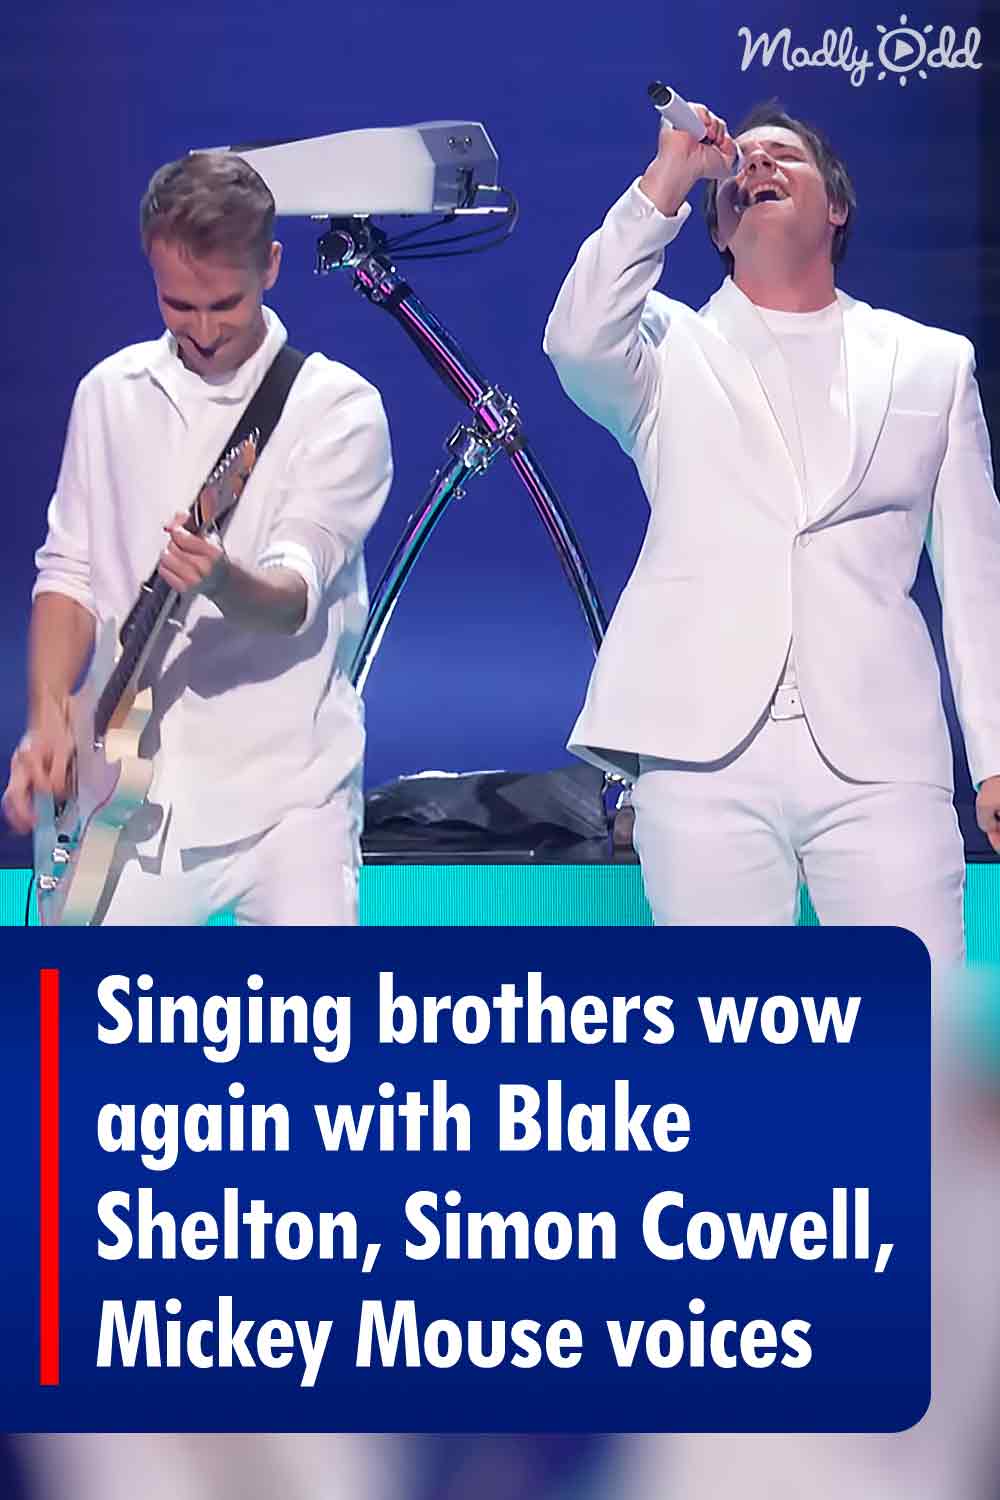 Singing brothers wow again with Blake Shelton, Simon Cowell, Mickey Mouse voices